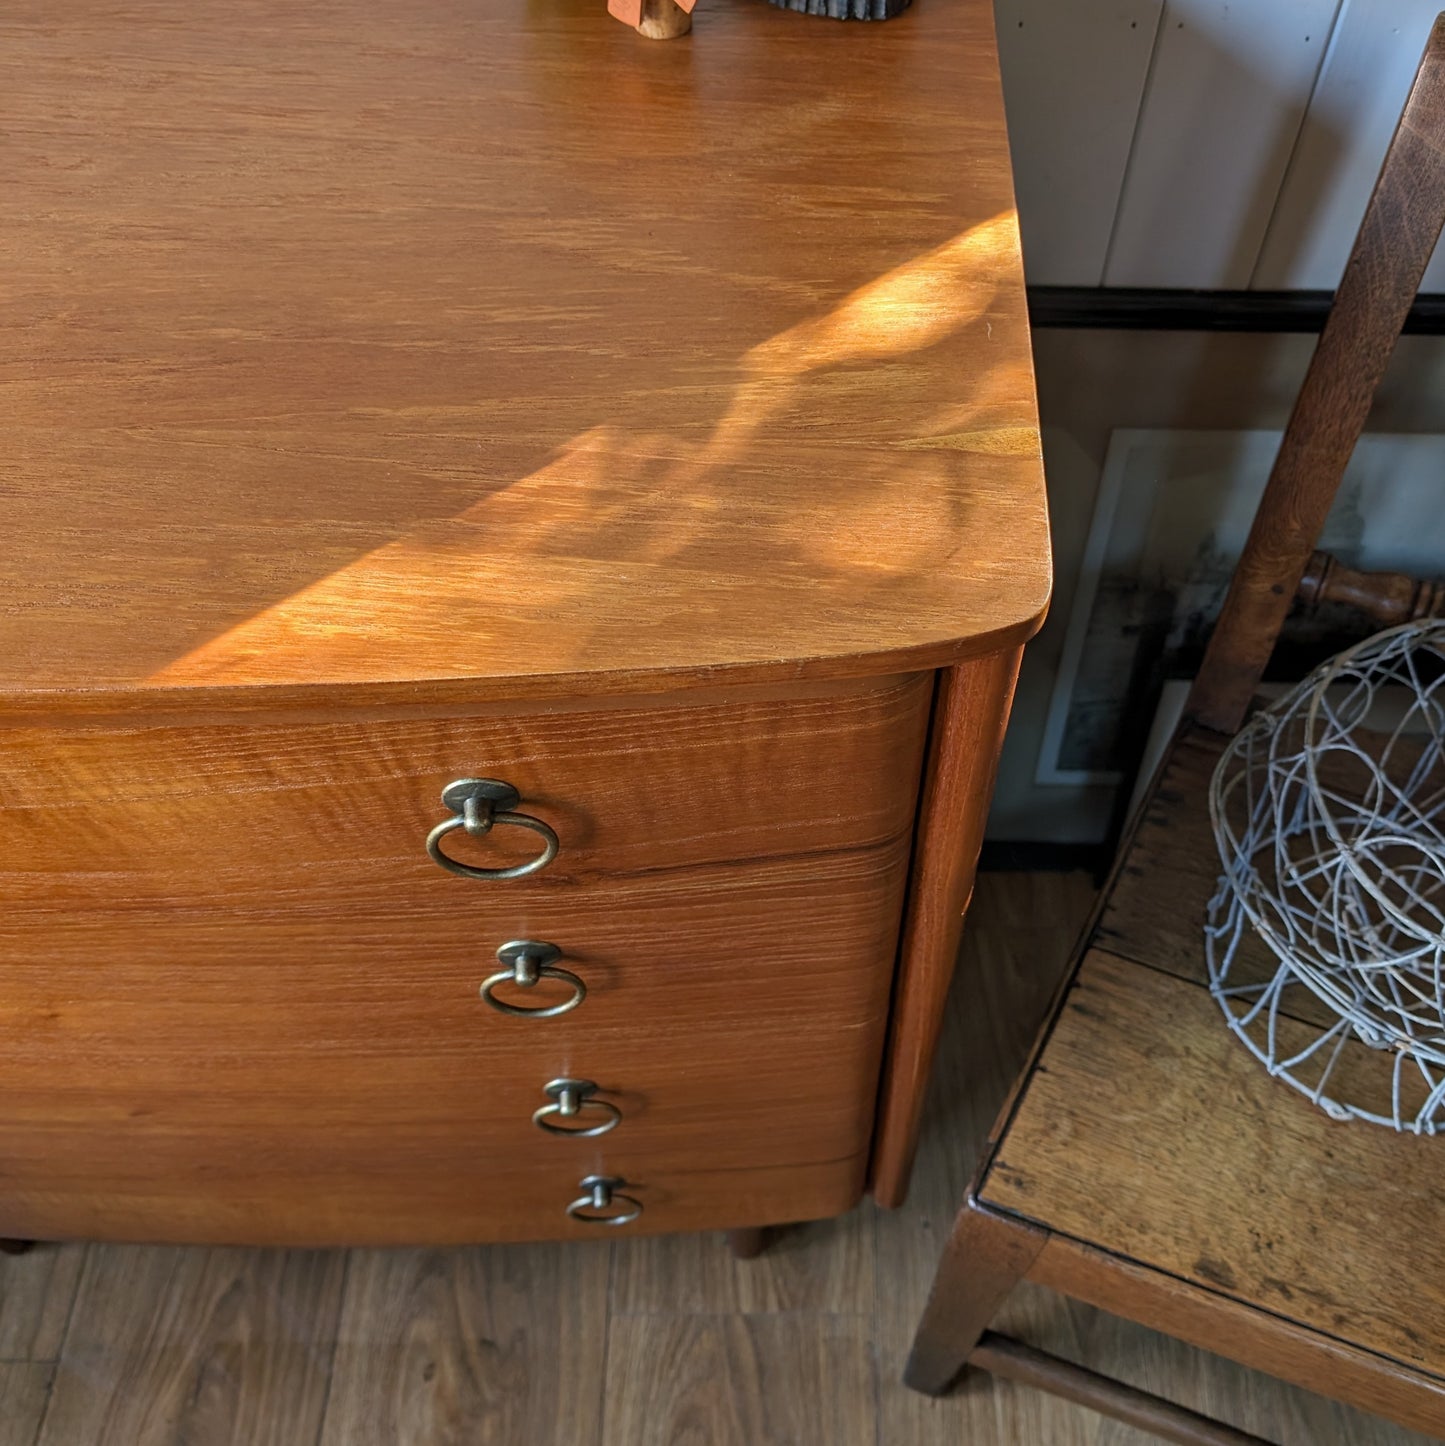 Mid Century Chest of Drawers